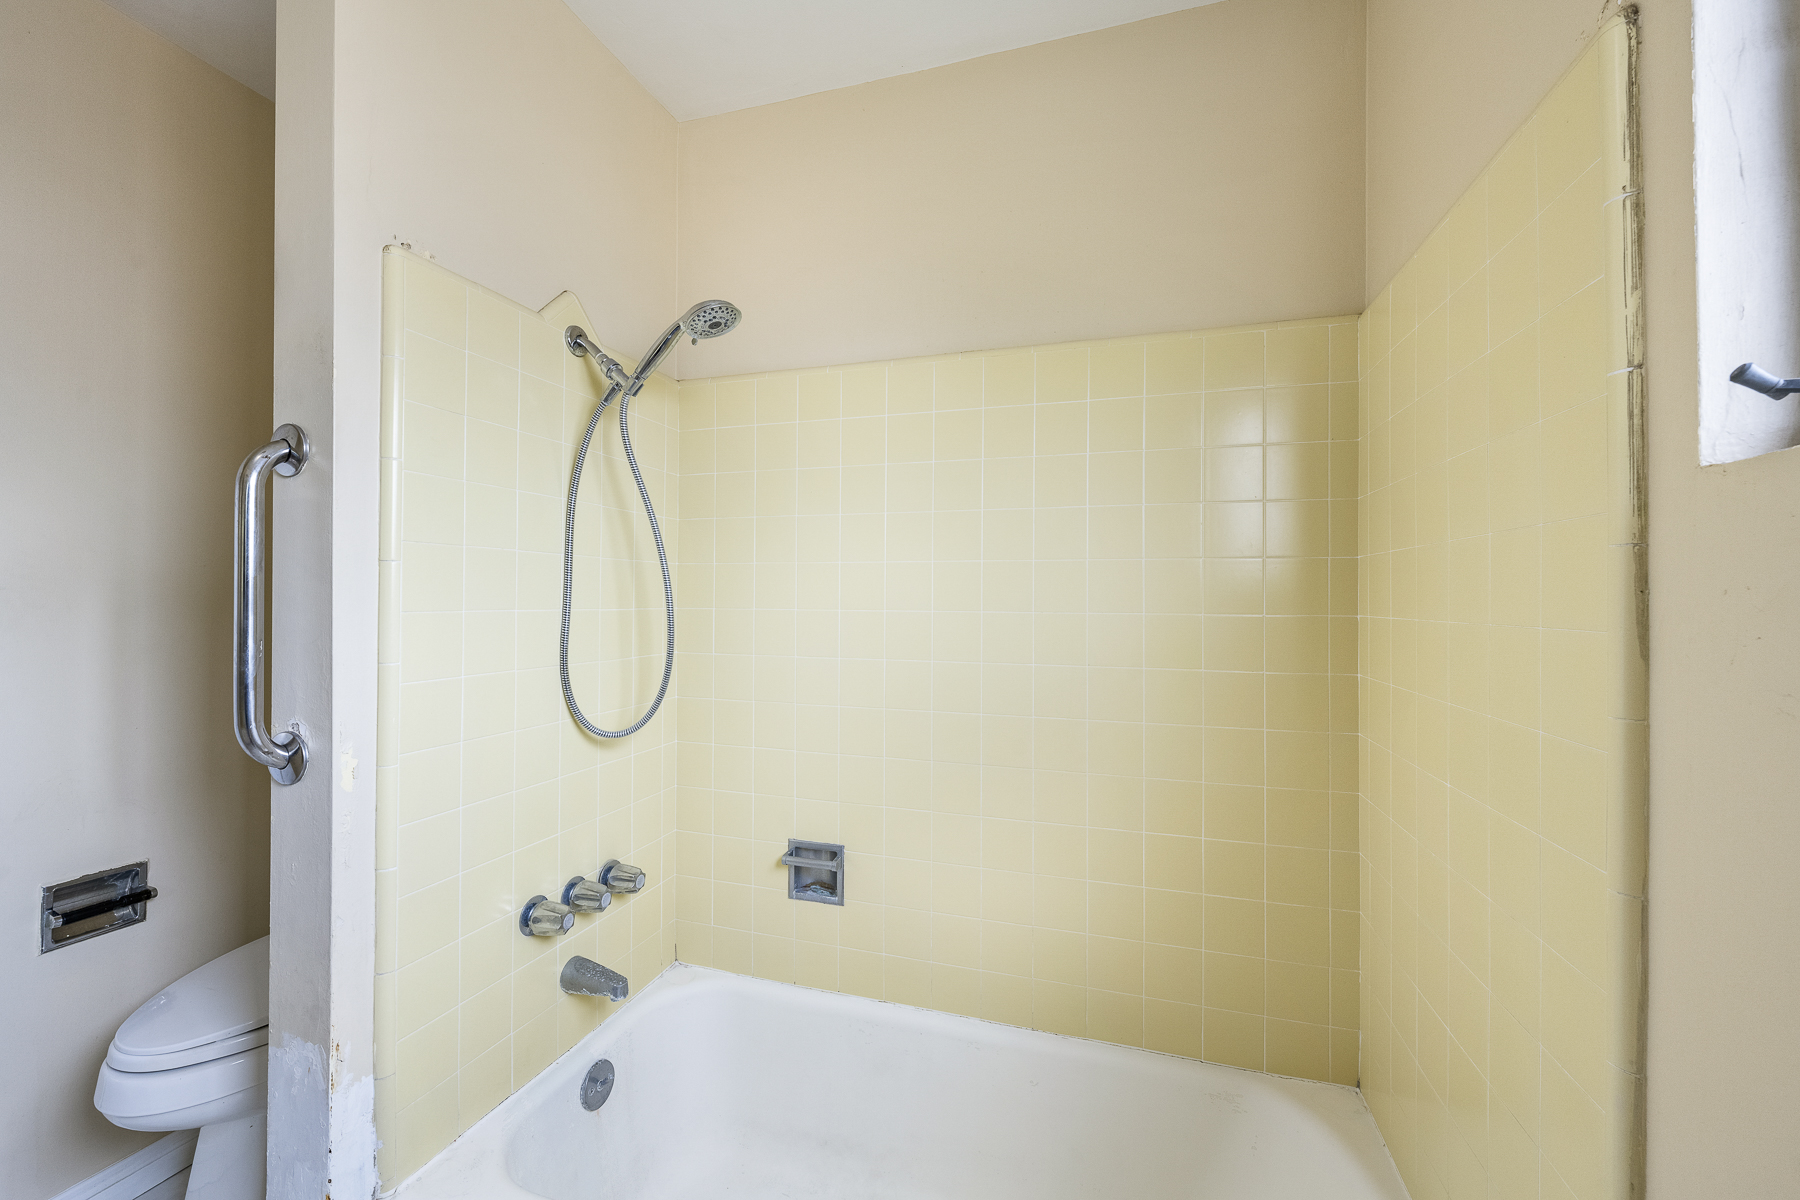 501 Dorothy Drive: Bathroom/shower with ivory tile and a handicap rail